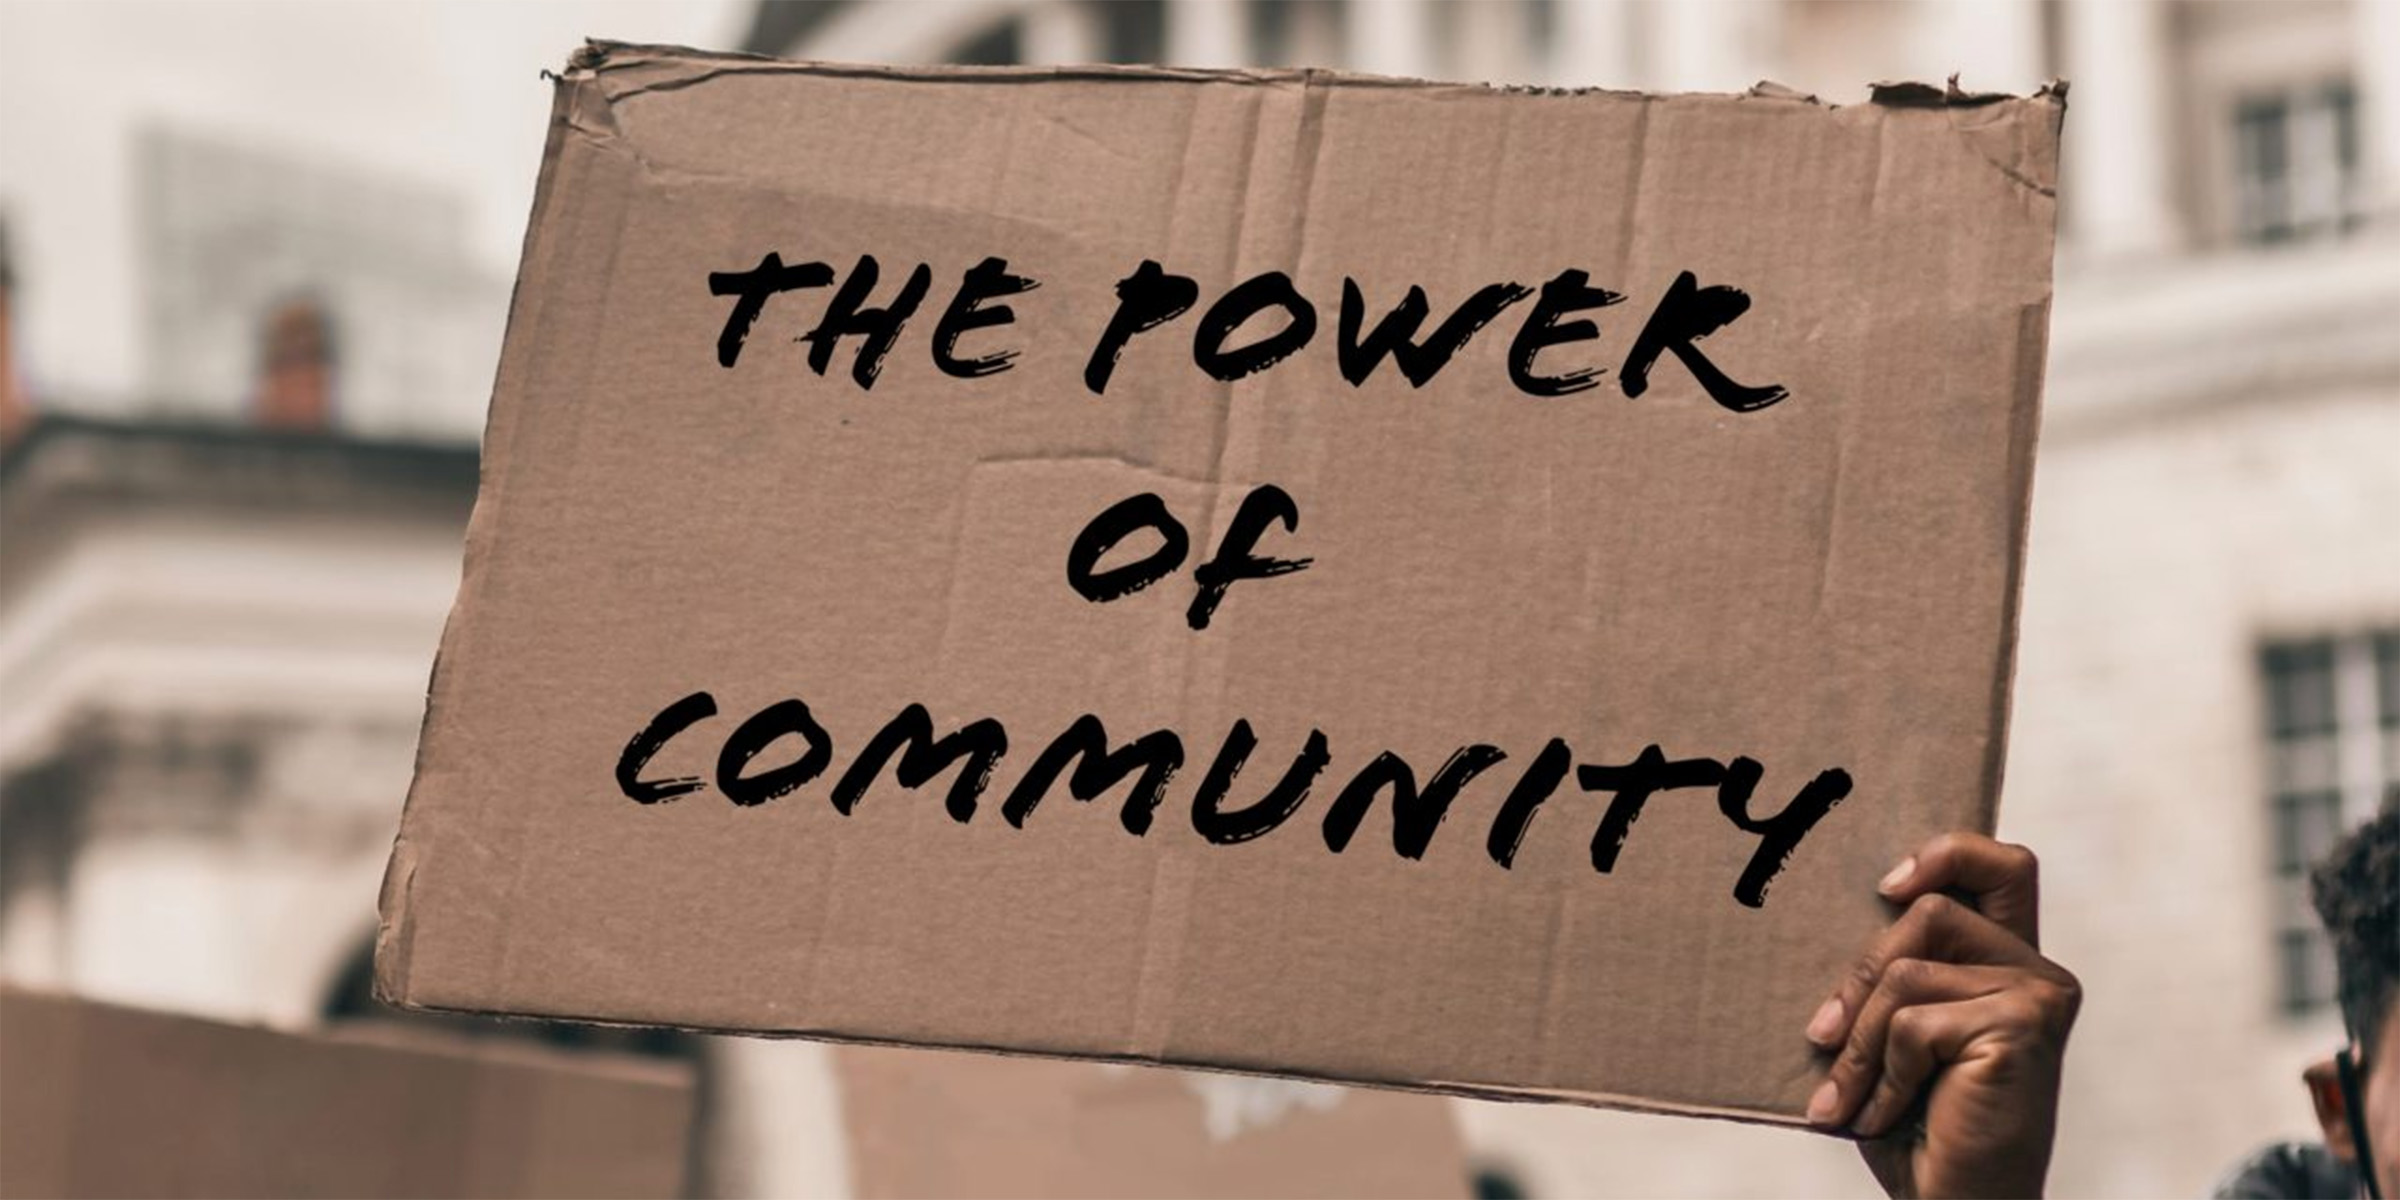 person holding power of community sign